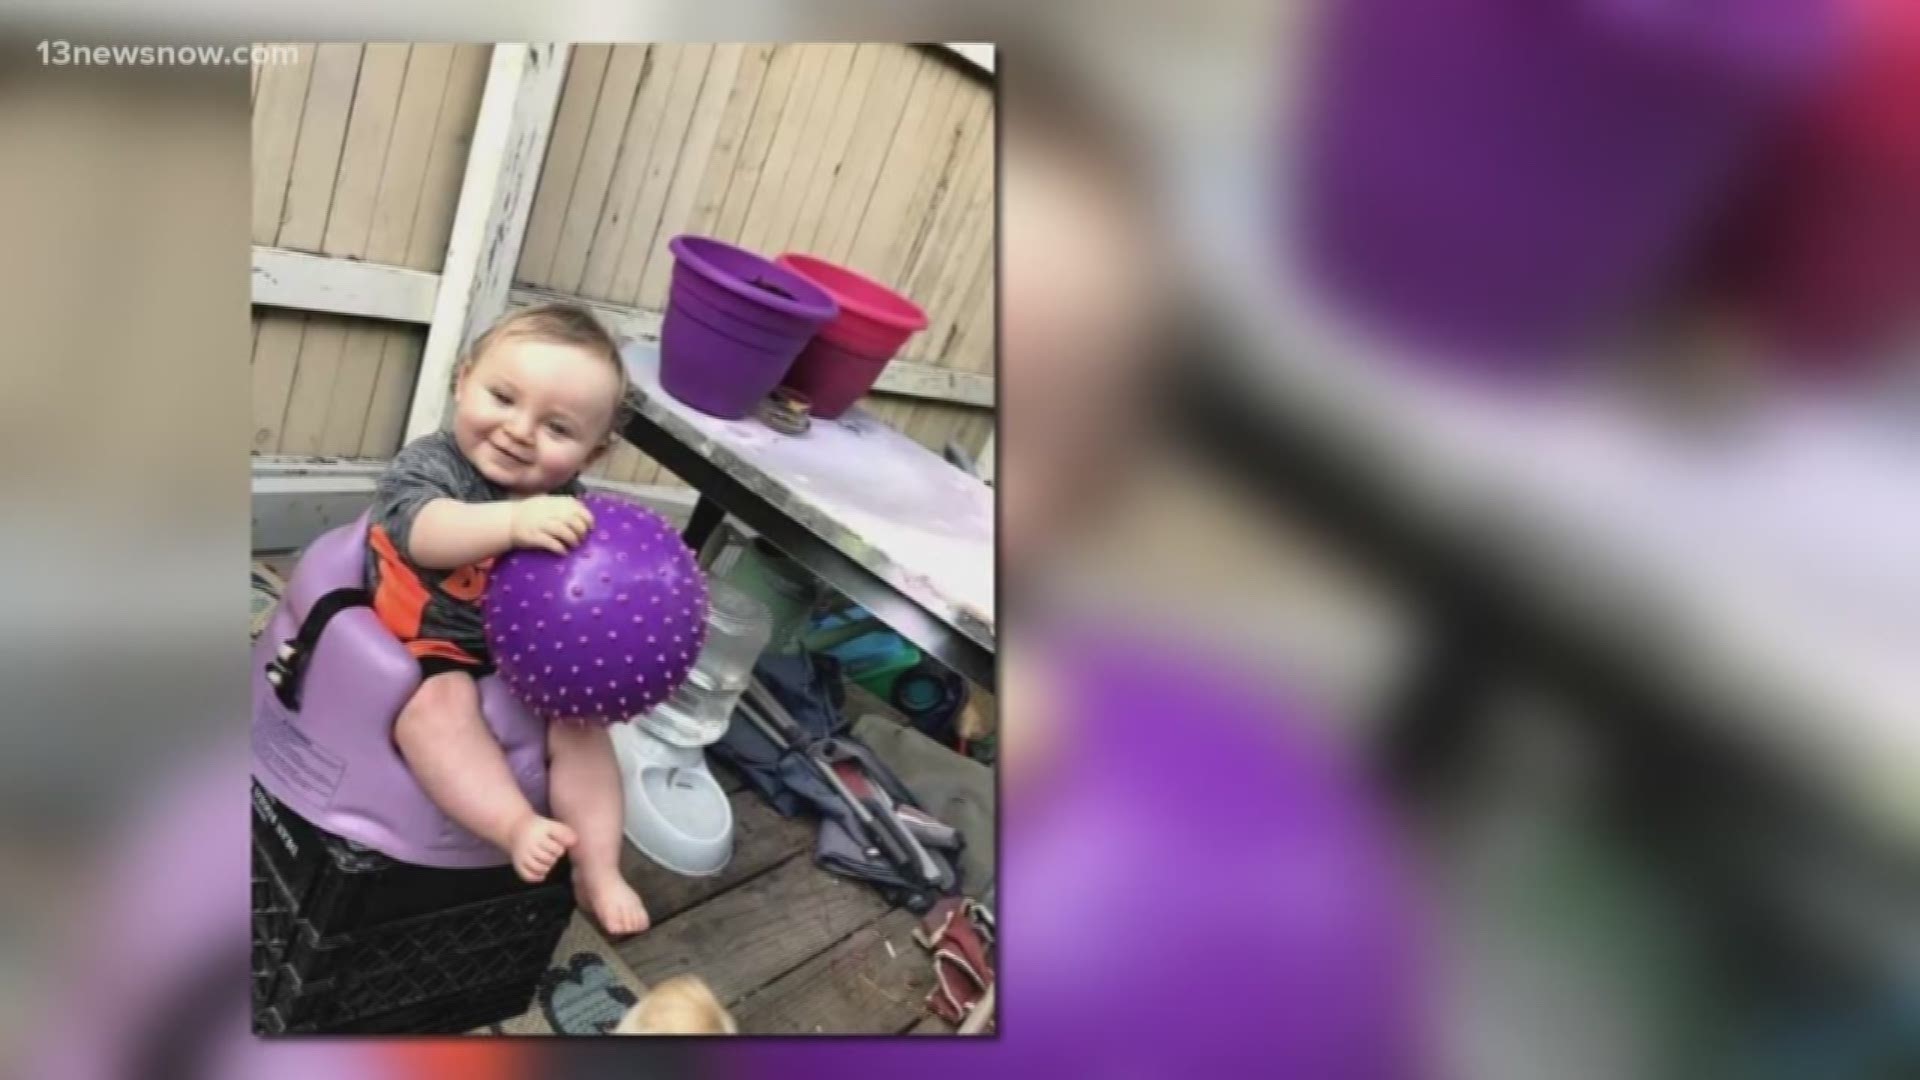 Cindy Jones released a statement about her 2-year-old grandson's disappearance after Hampton police found what they believe to be Noah's body.